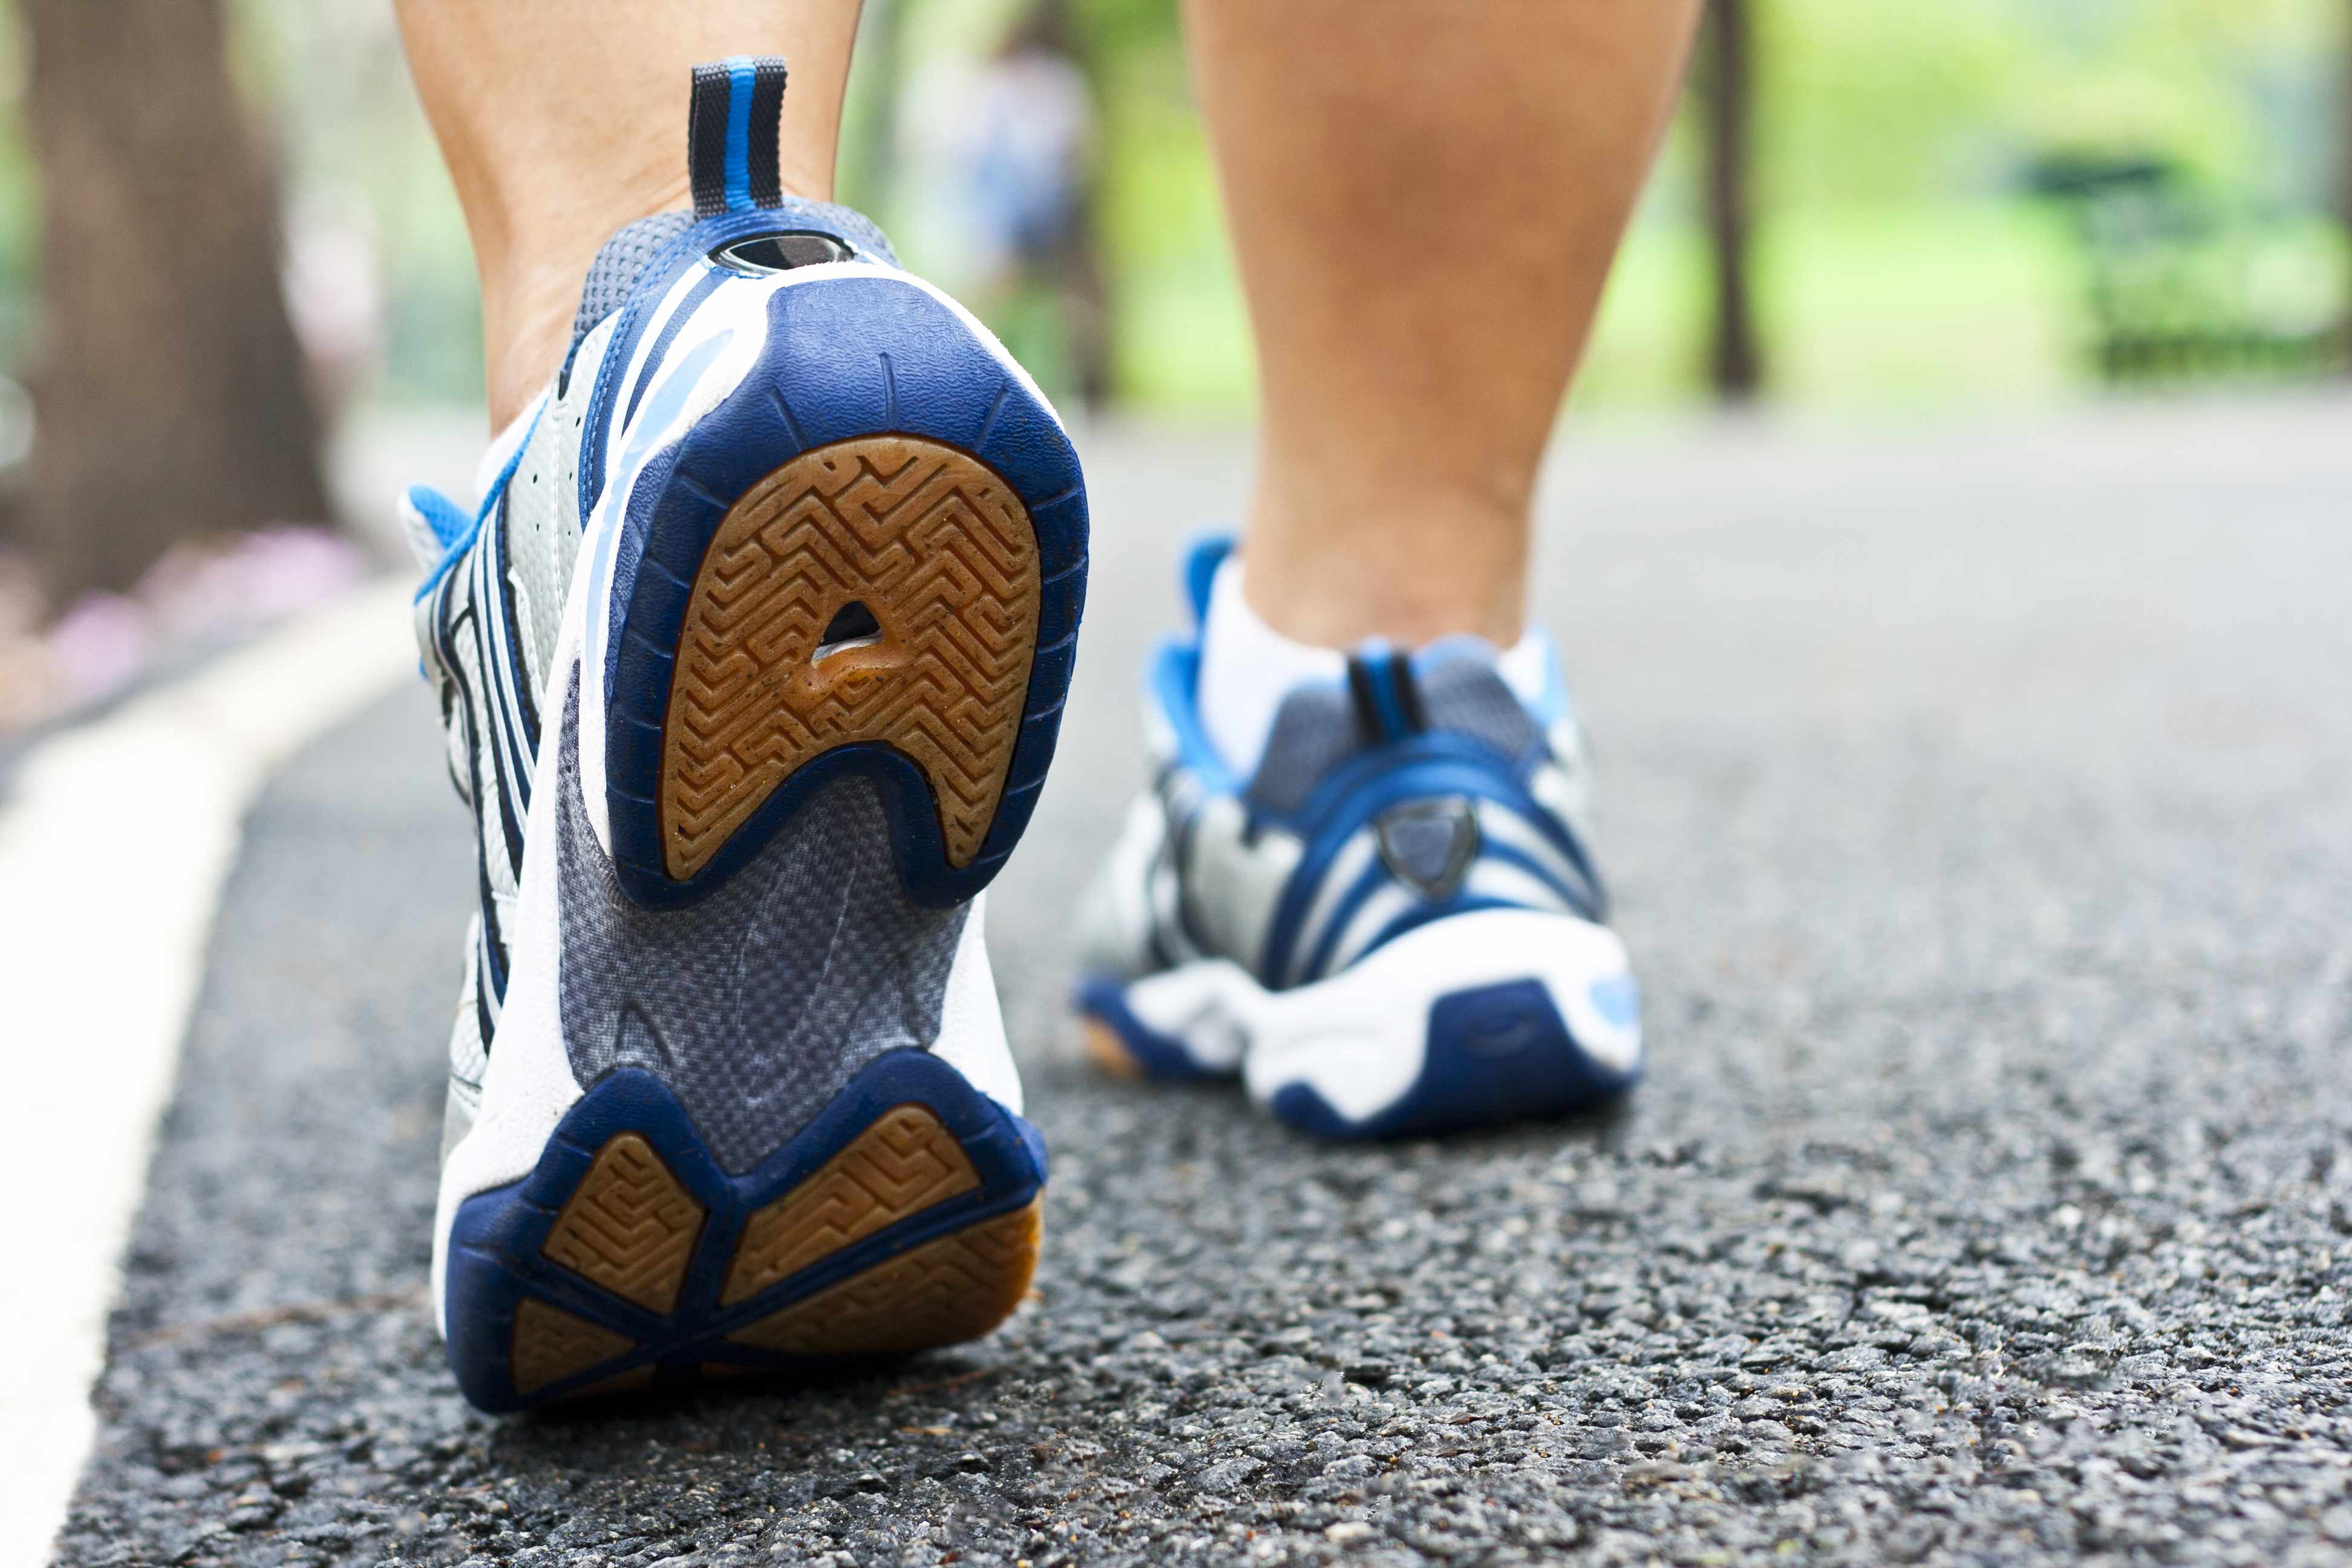 Vies hoe Geleidbaarheid Consumer Health Tips: These shoes are made for walking - Mayo Clinic News  Network